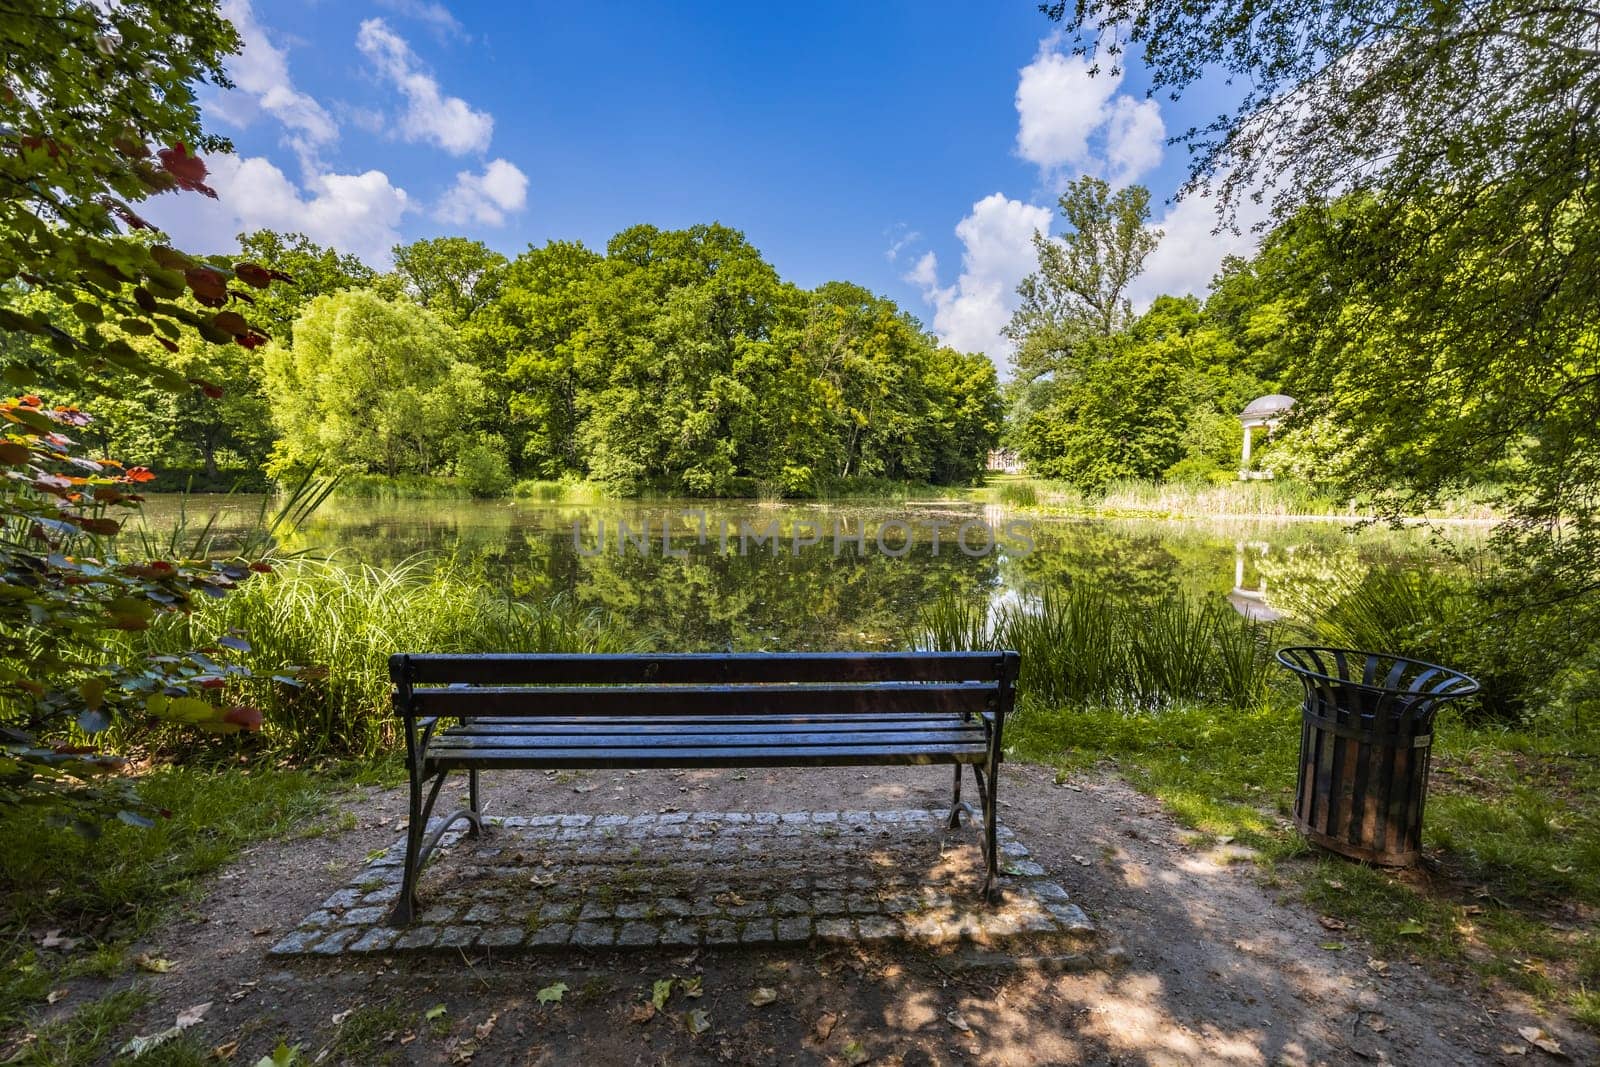 Old wooden bench in beautiful and colorful park at sunny morning with blue sky with few clouds beautifully reflecting in big silent lake like in mirror by Wierzchu